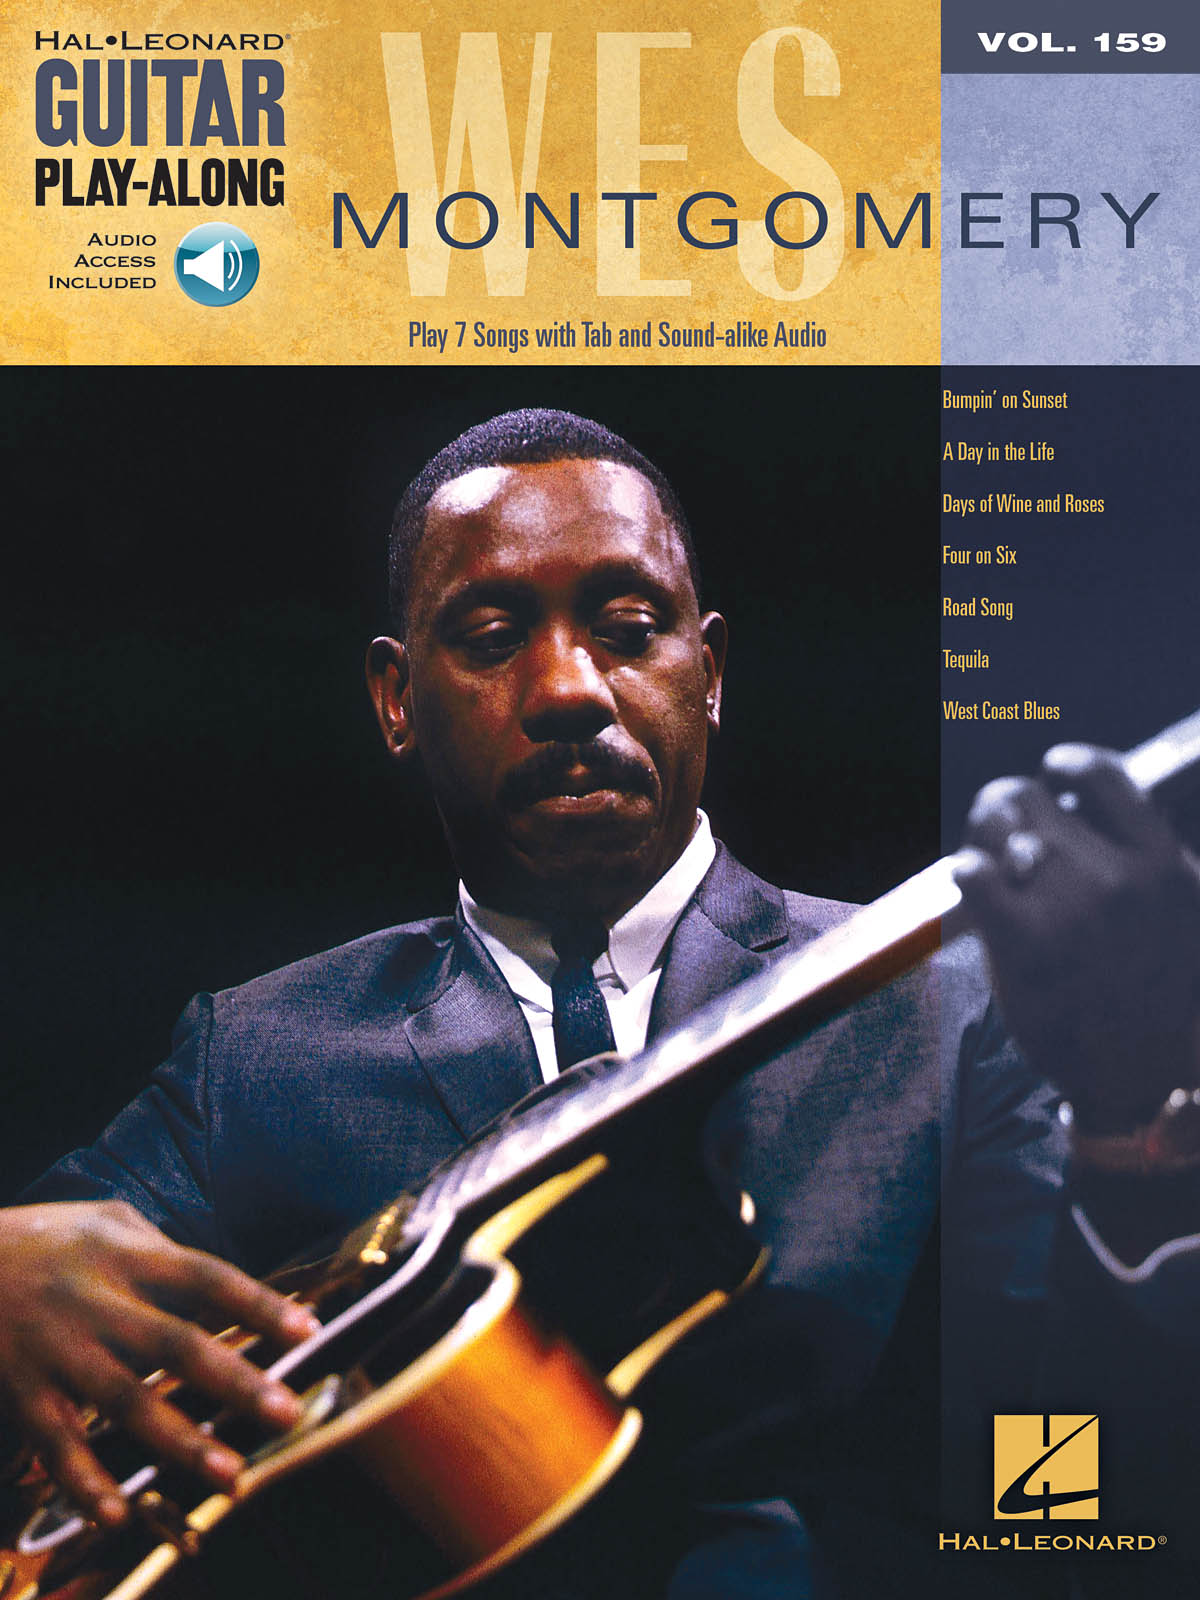 Wes Montgomery - Guitar Play-Along Volume 159